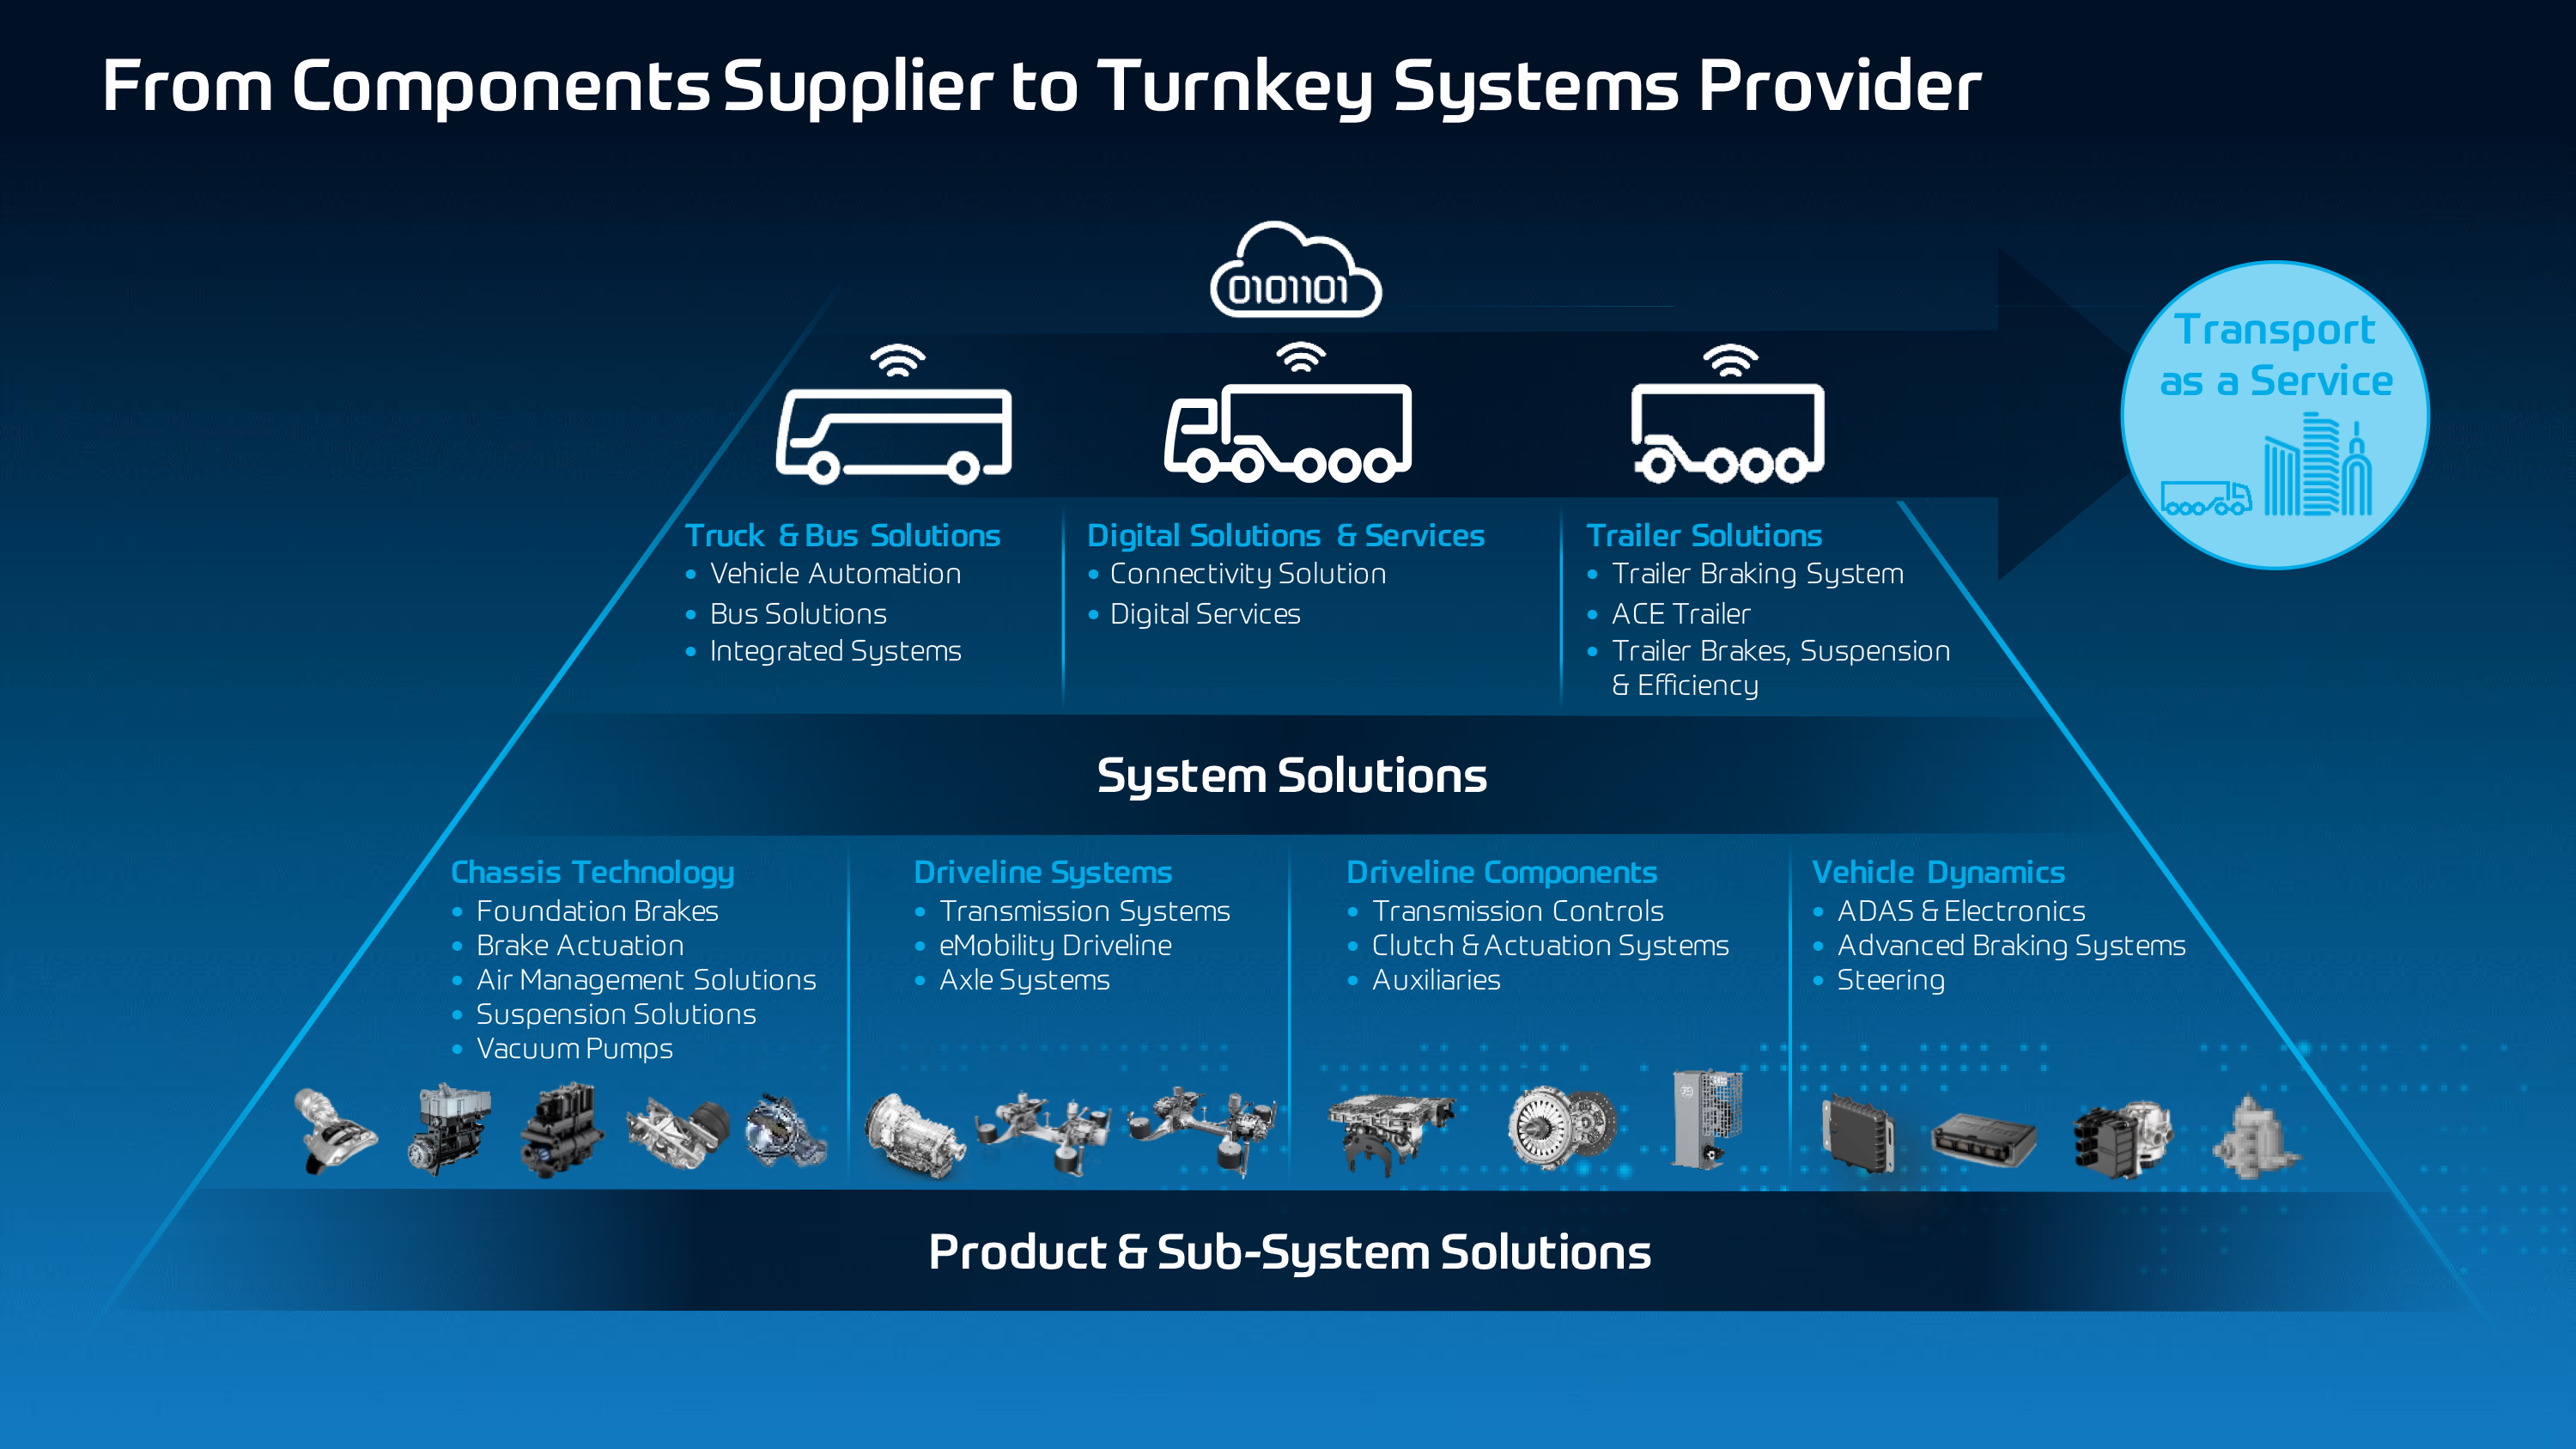 ZF Turnkey Systems Solutions for truck, bus and trailer